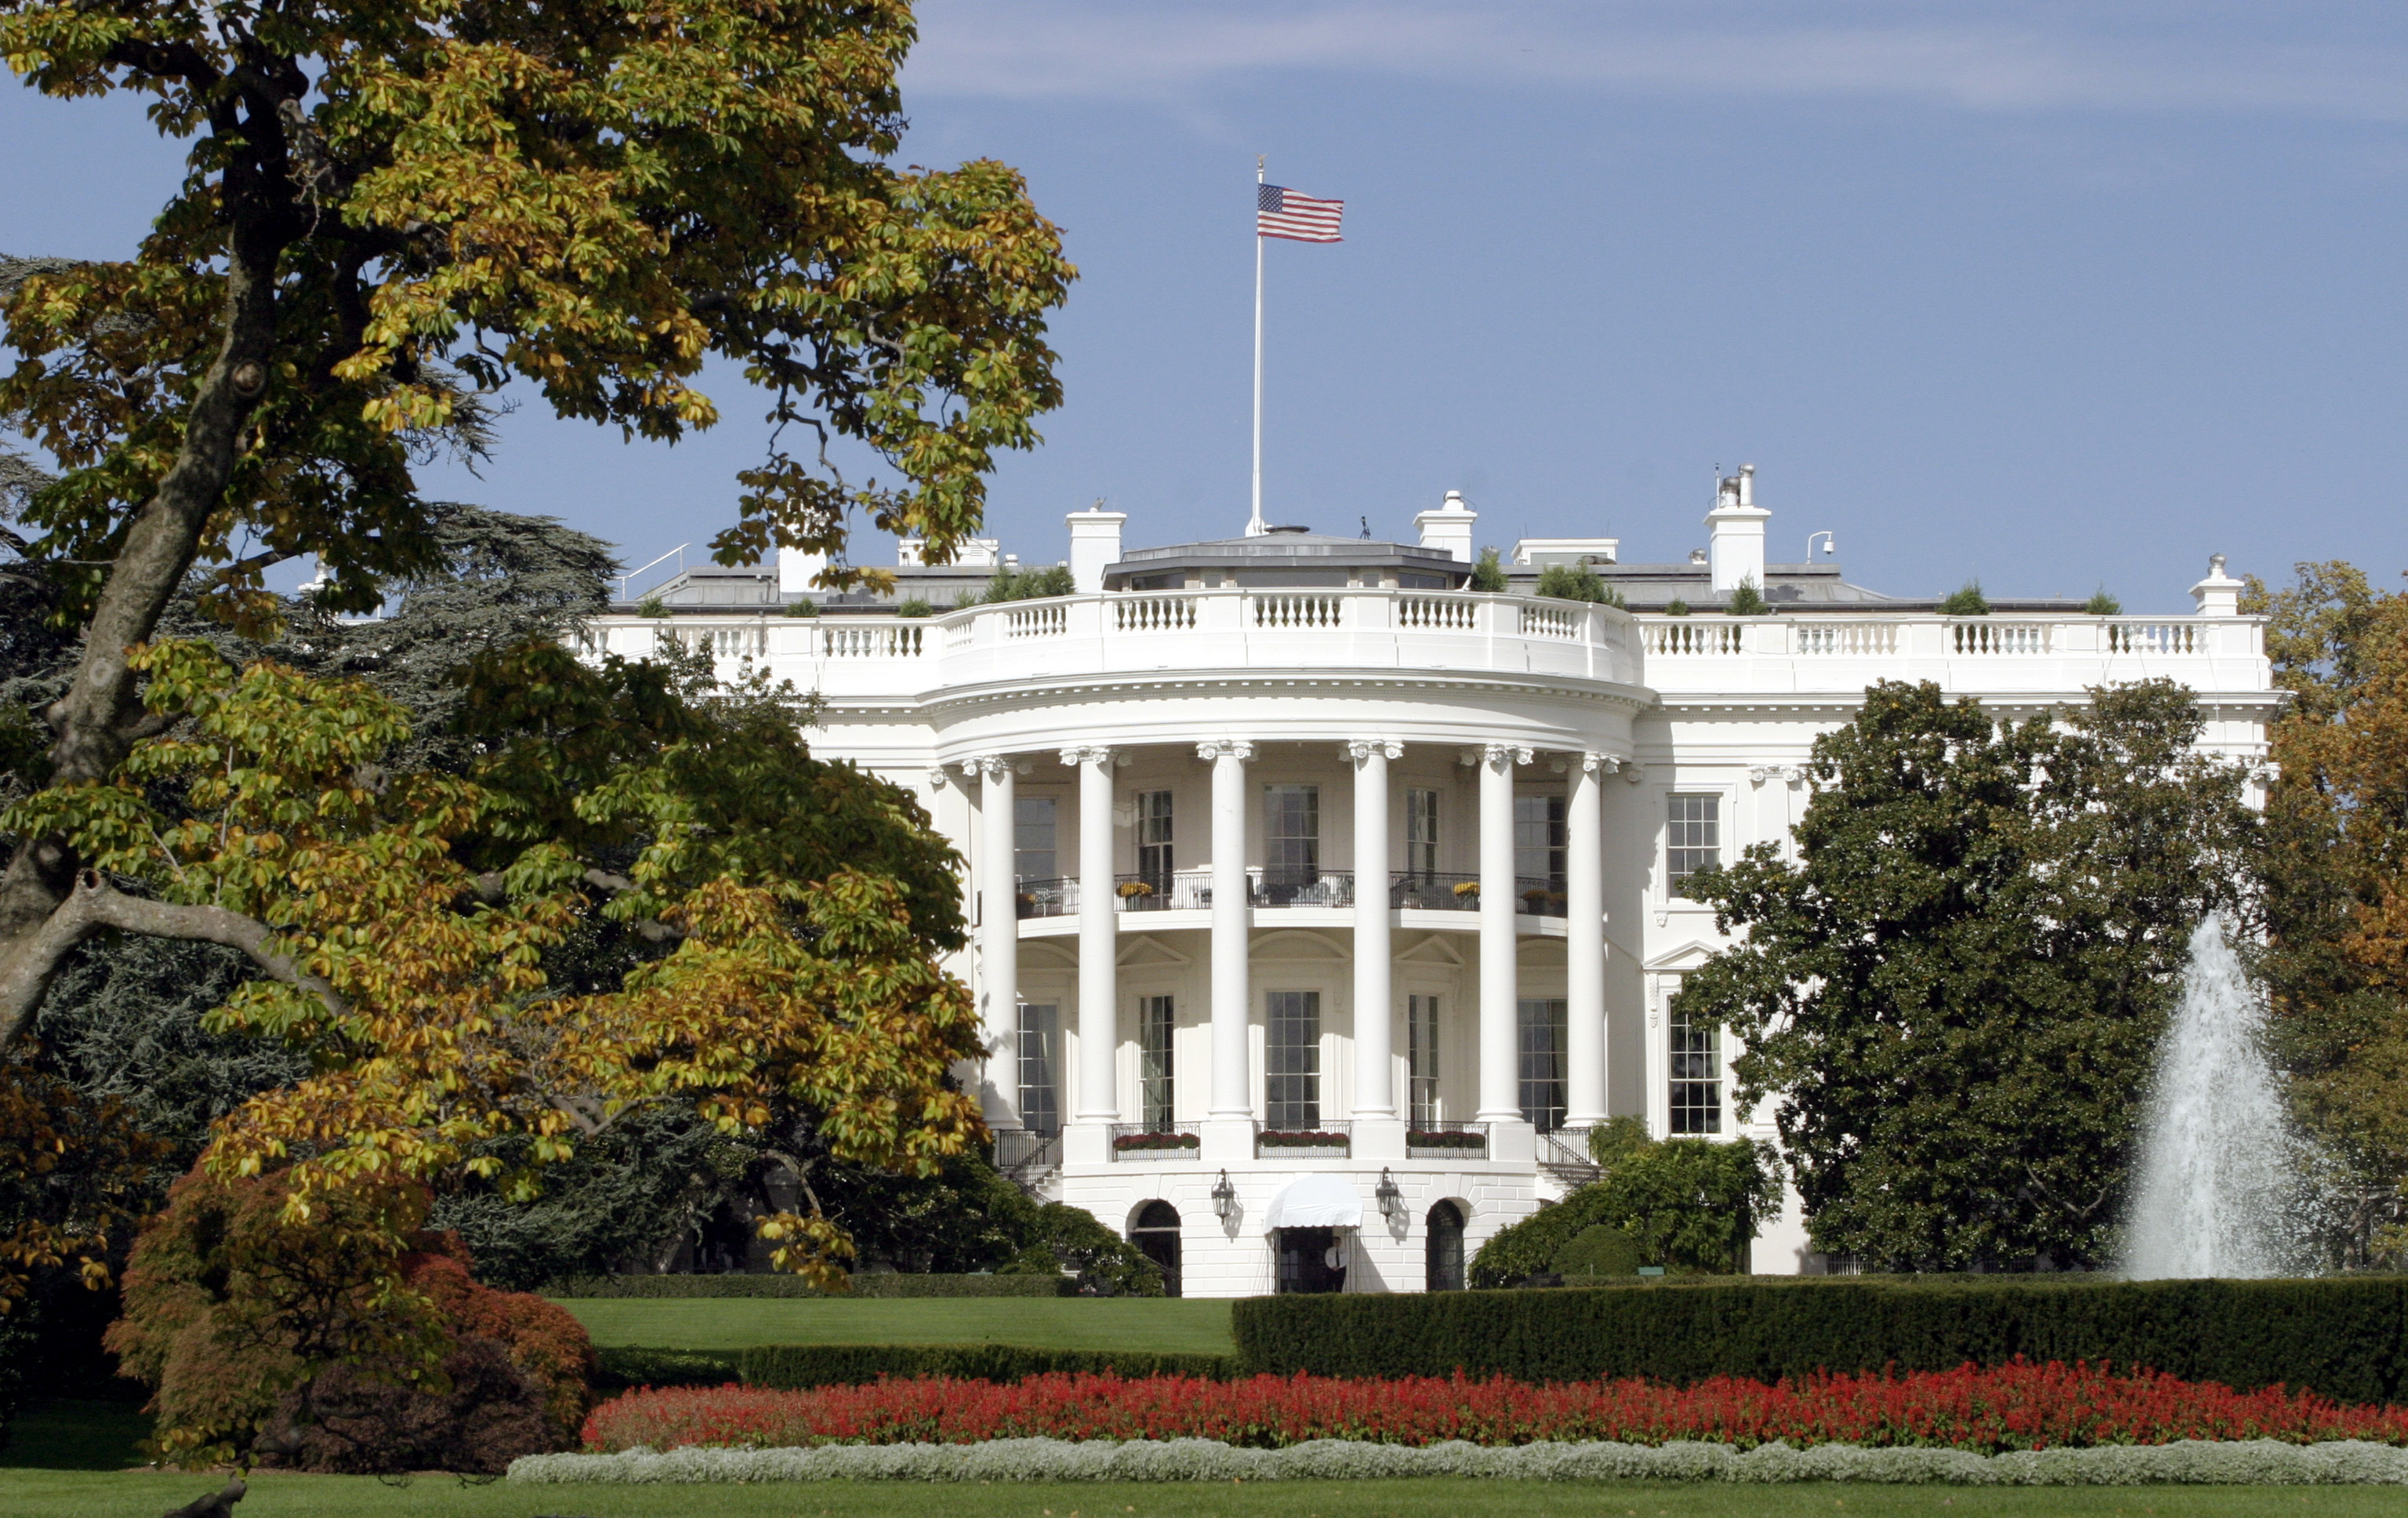 The White House is pictured in Washington D.C., two days ahead of the presidential election.